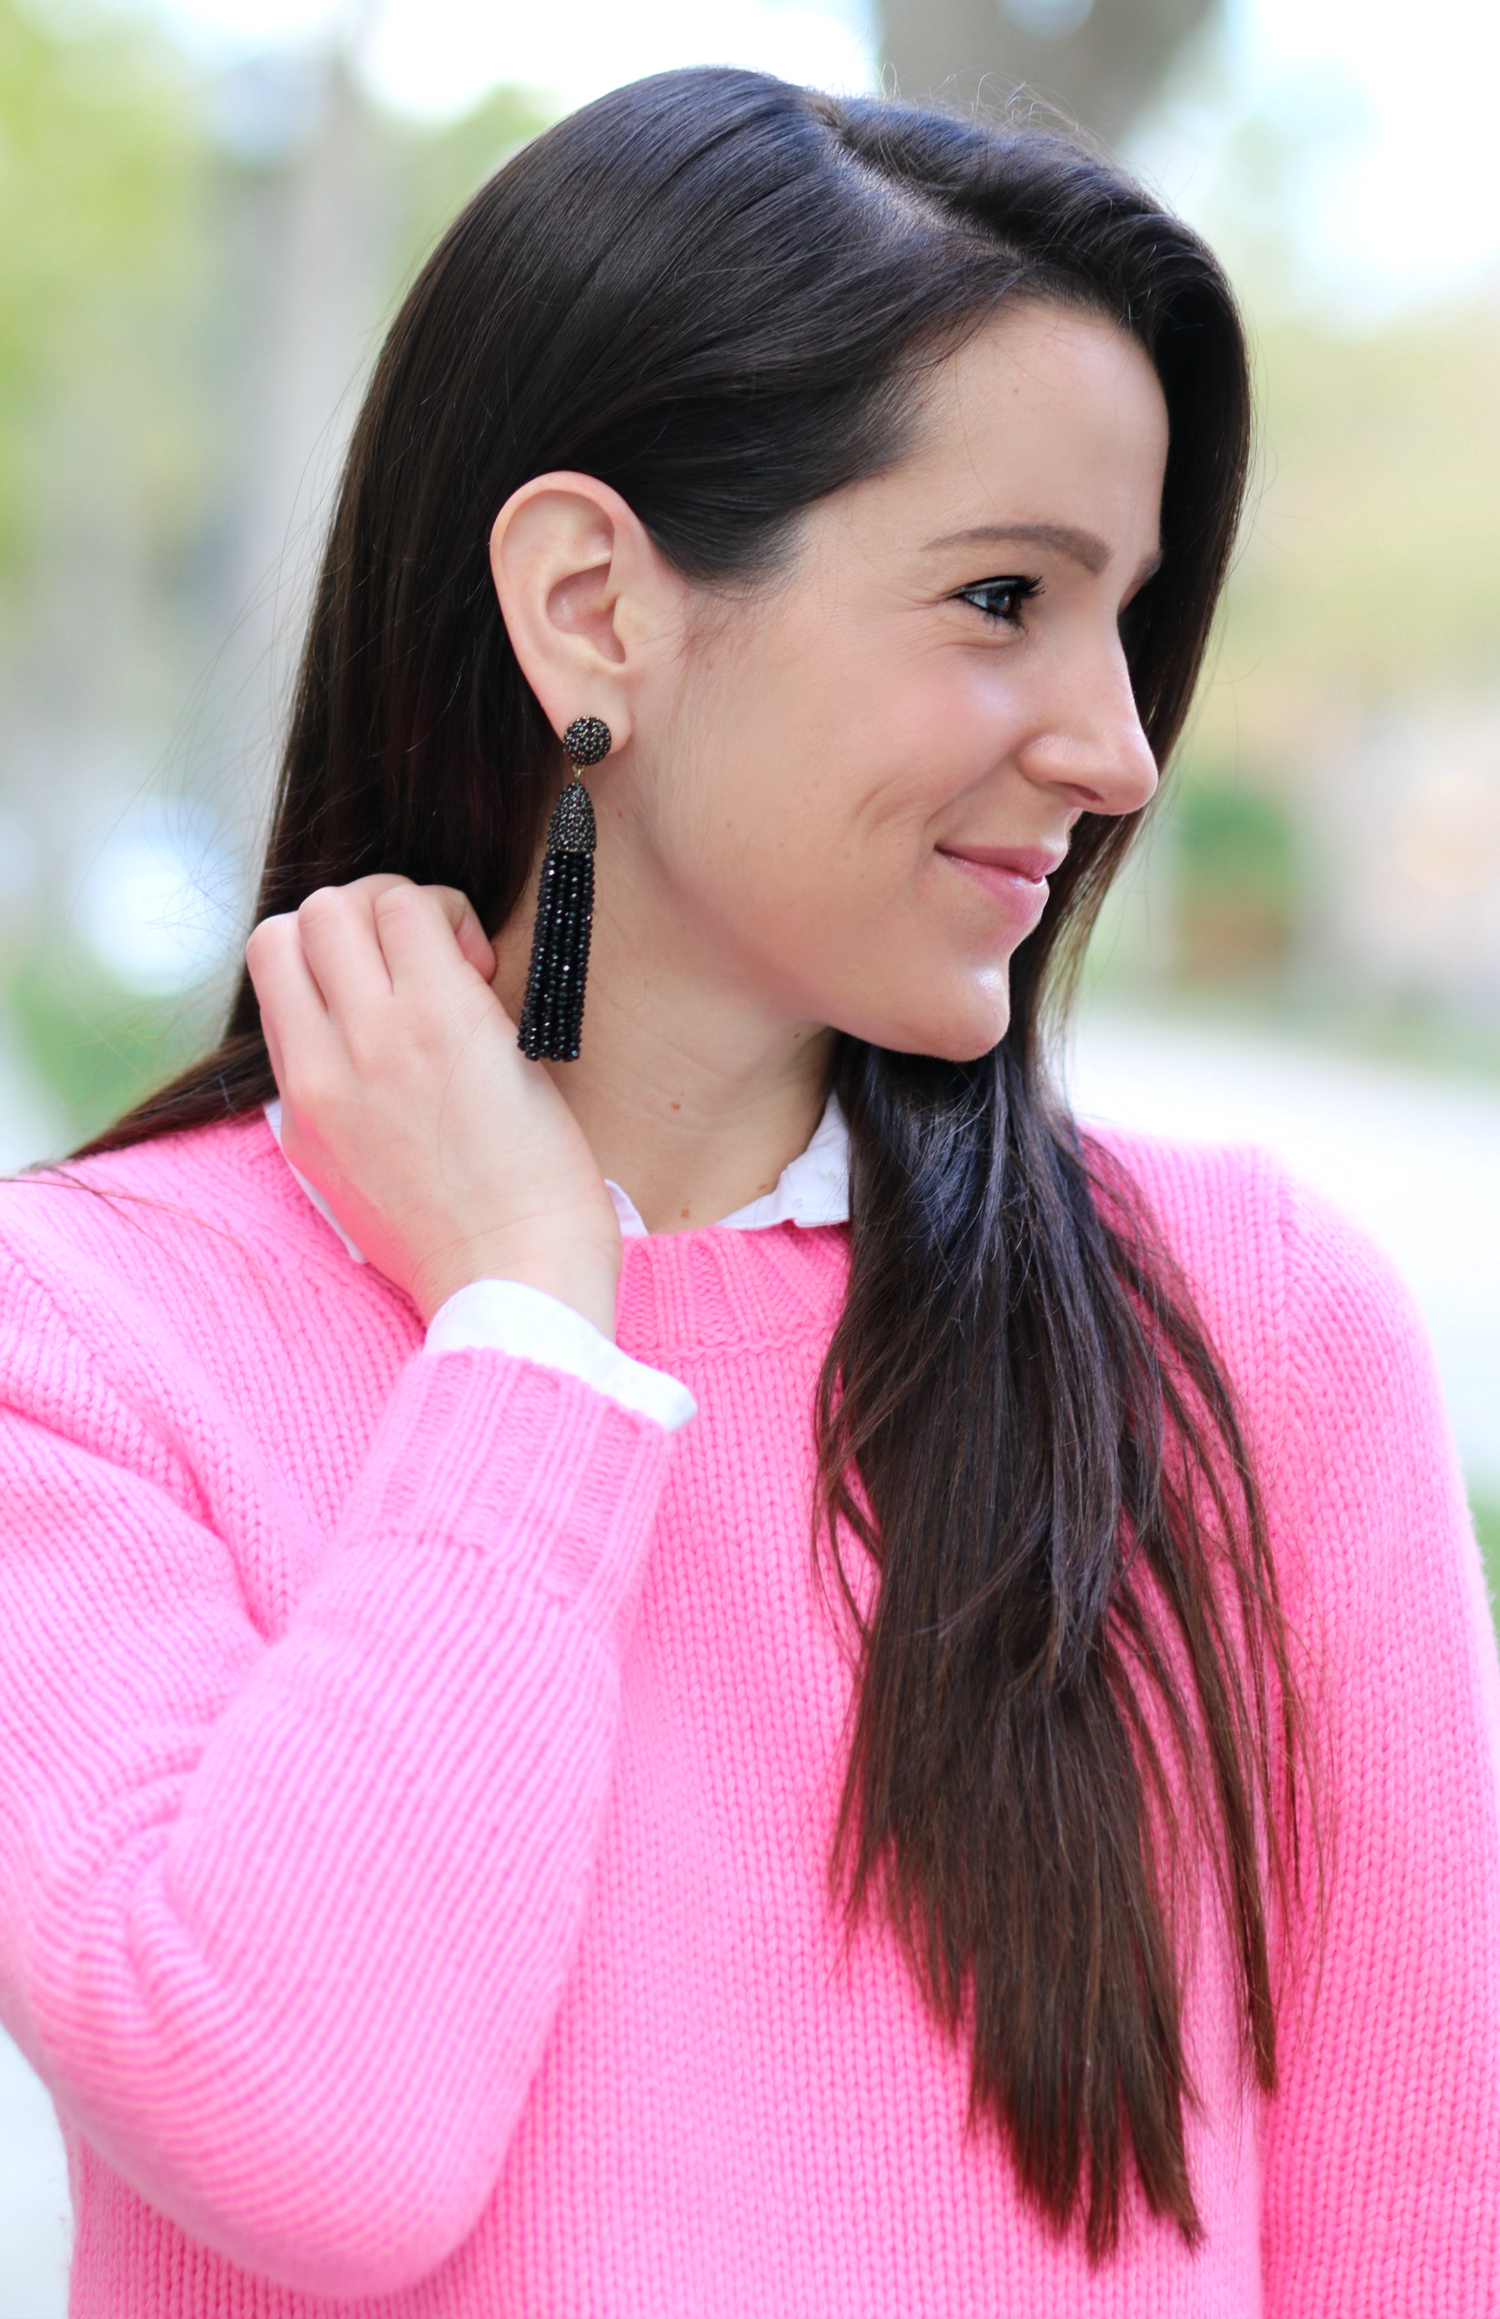 A preppy, dressy casual hot pink crewneck sweater outfit from J.Crew Factory and SheIn